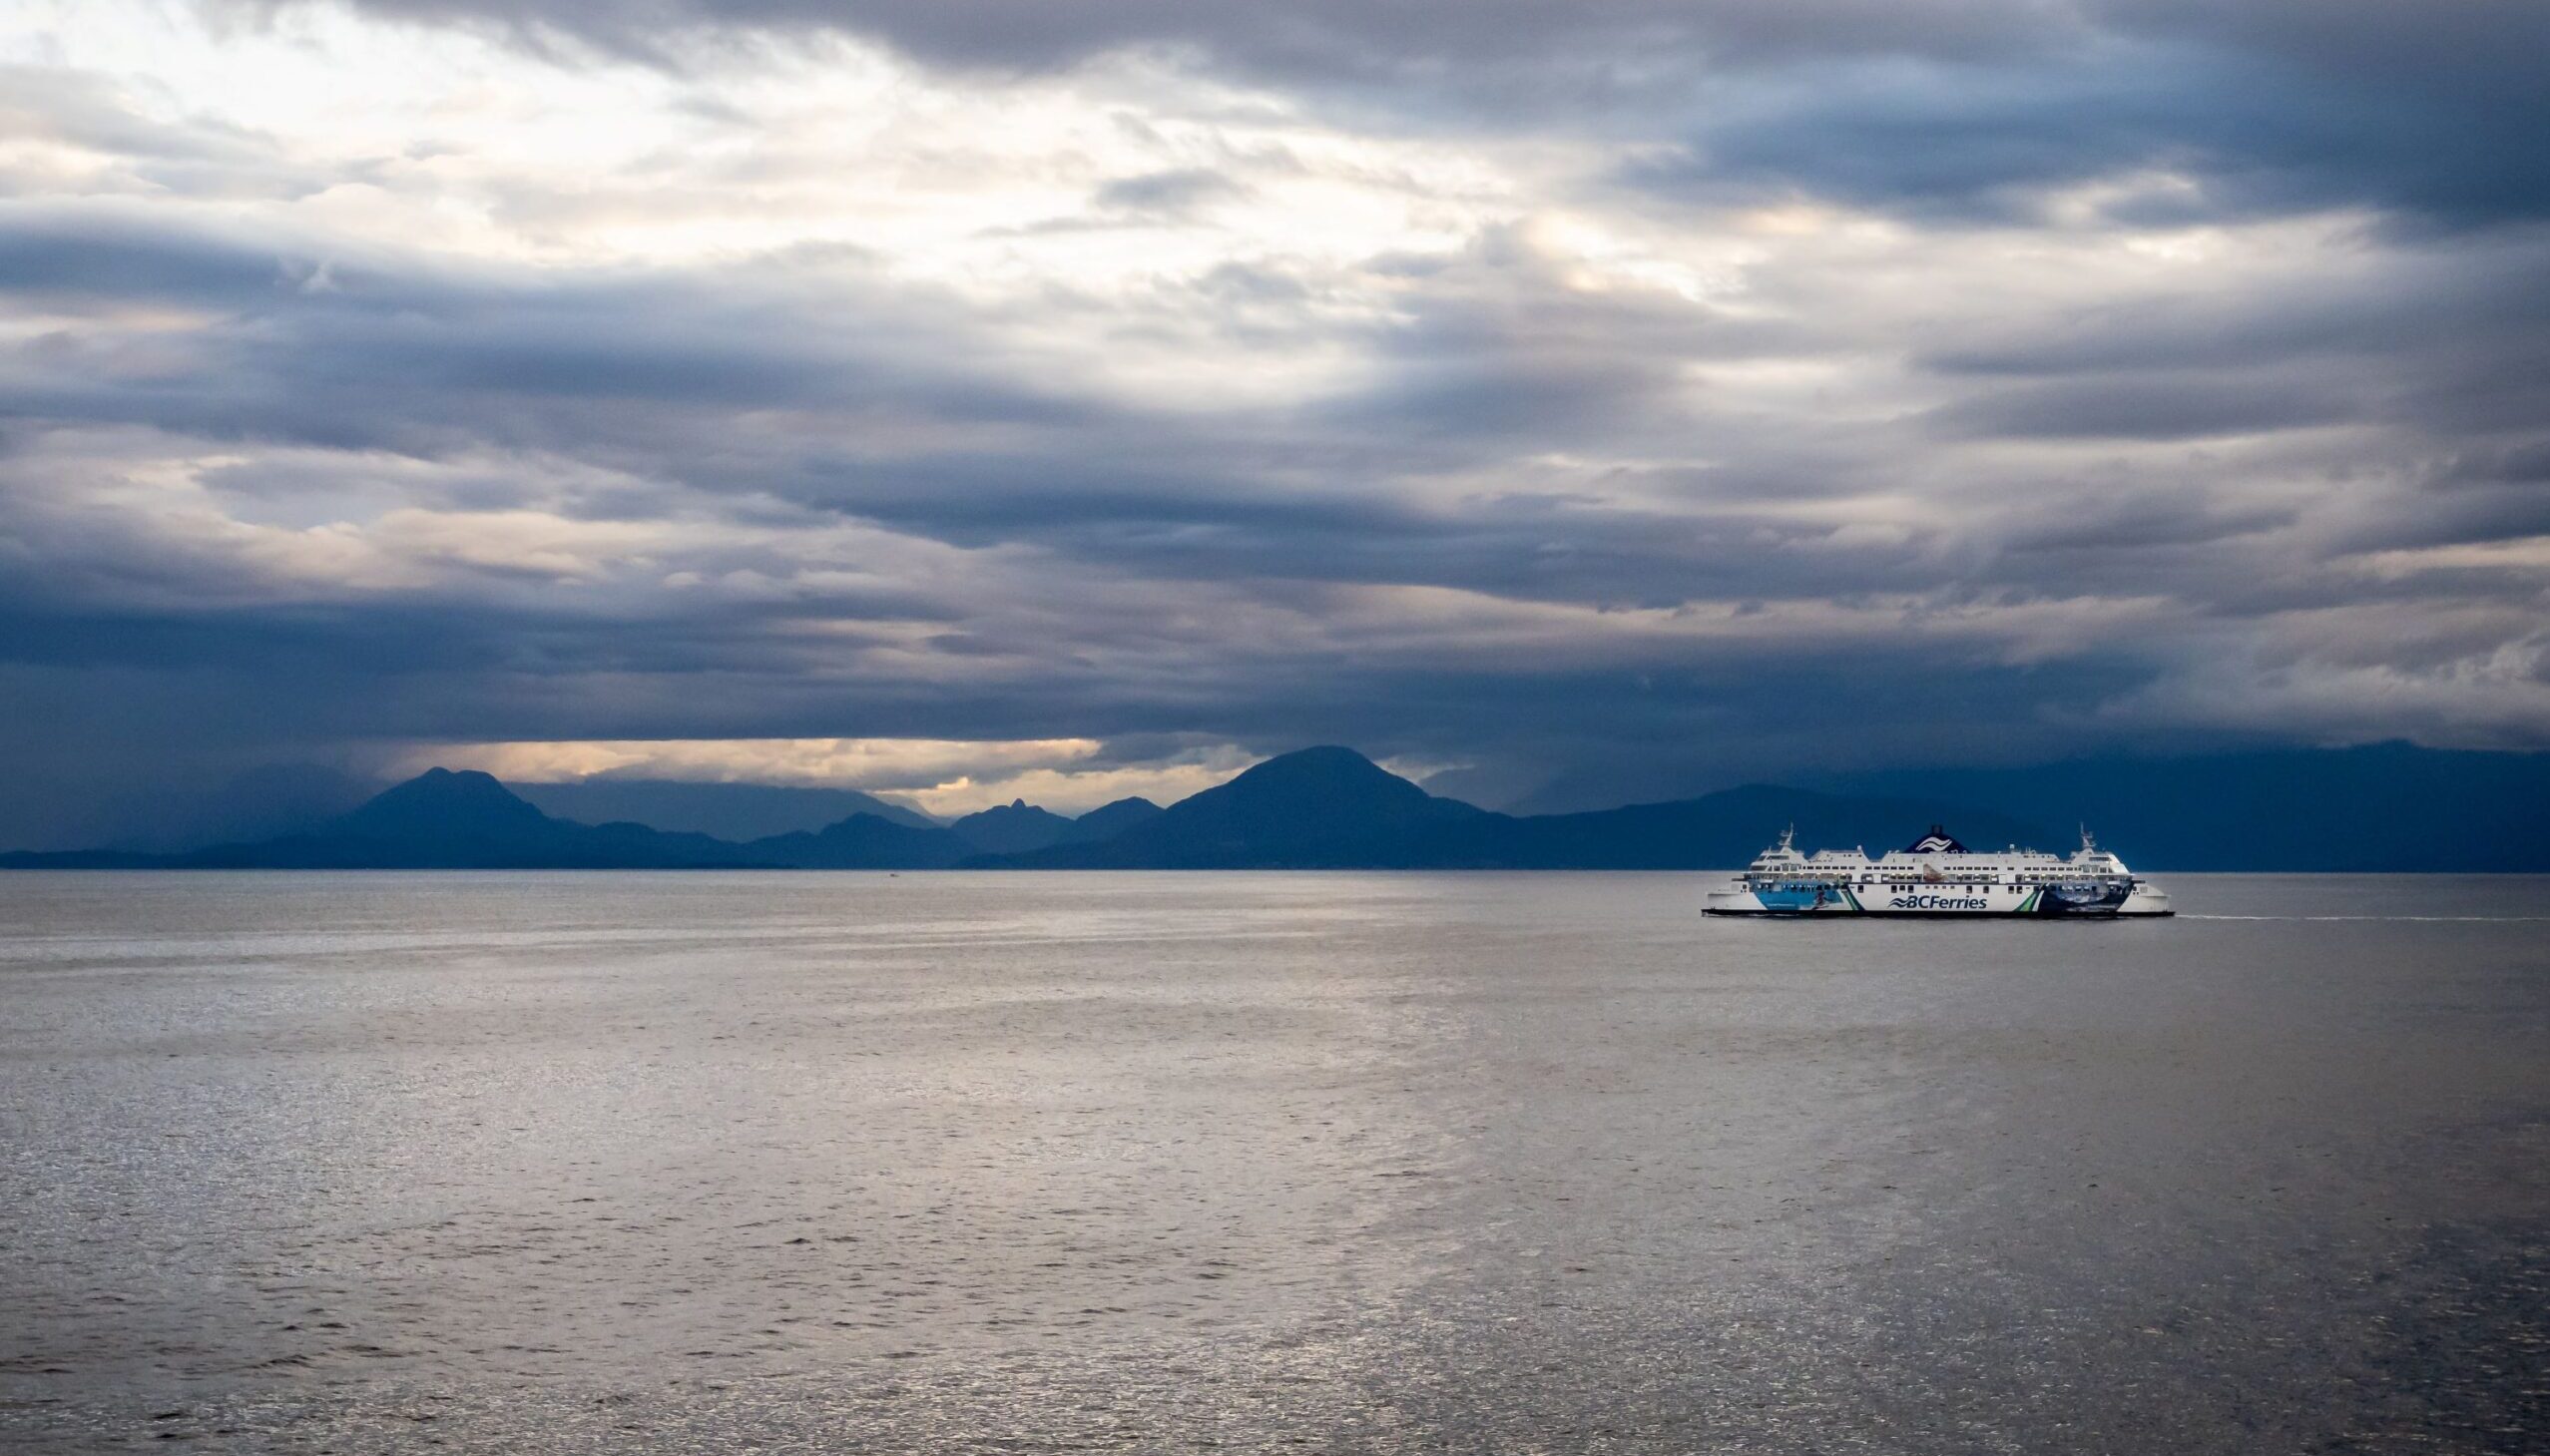 Photo of a ferry crossing the Salish Sea between Vancouver and Victoria.